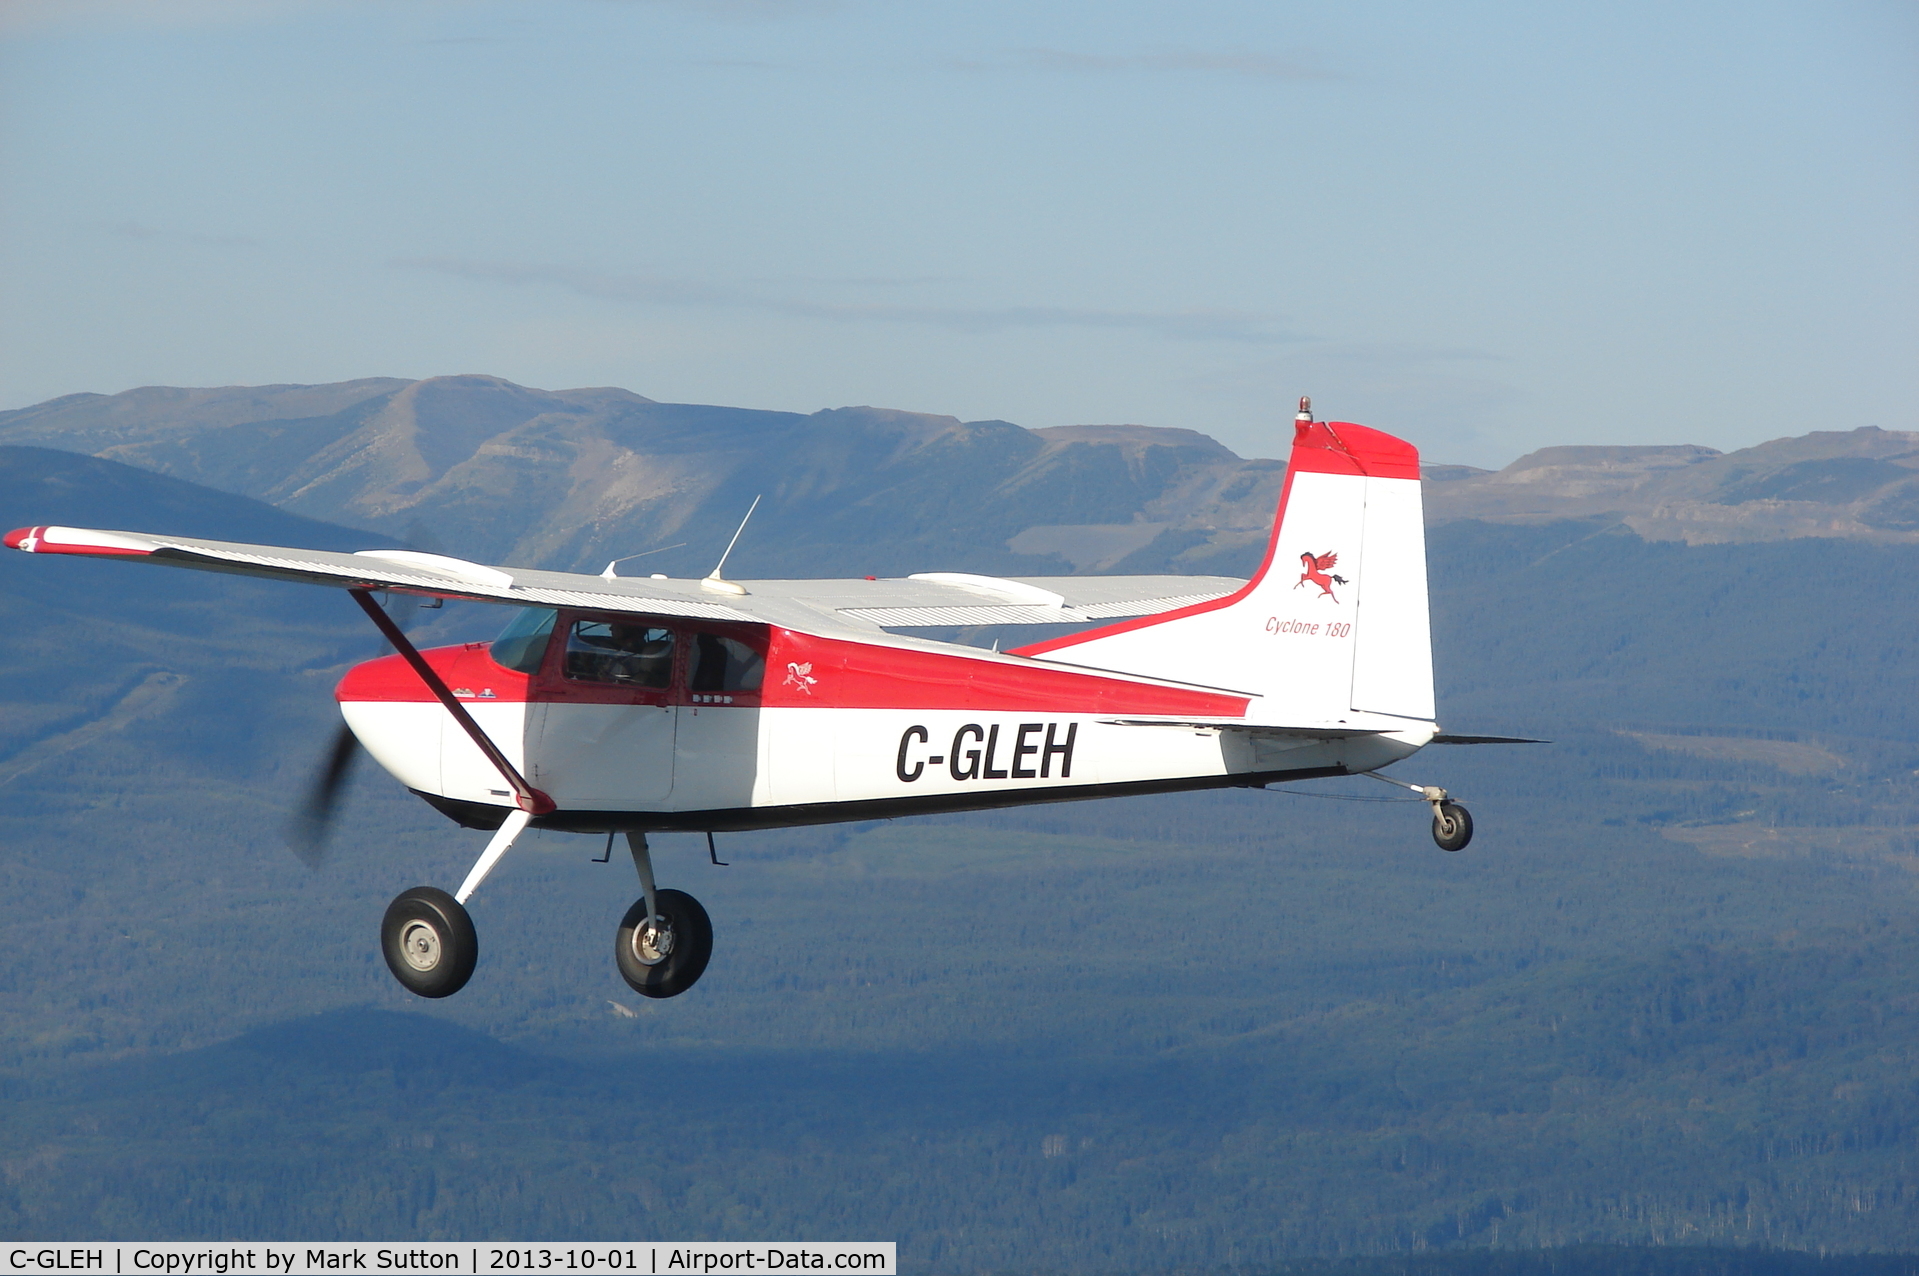 C-GLEH, 2004 St-Just Cyclone 180 C/N 0023, New picture with repainted nose cowl